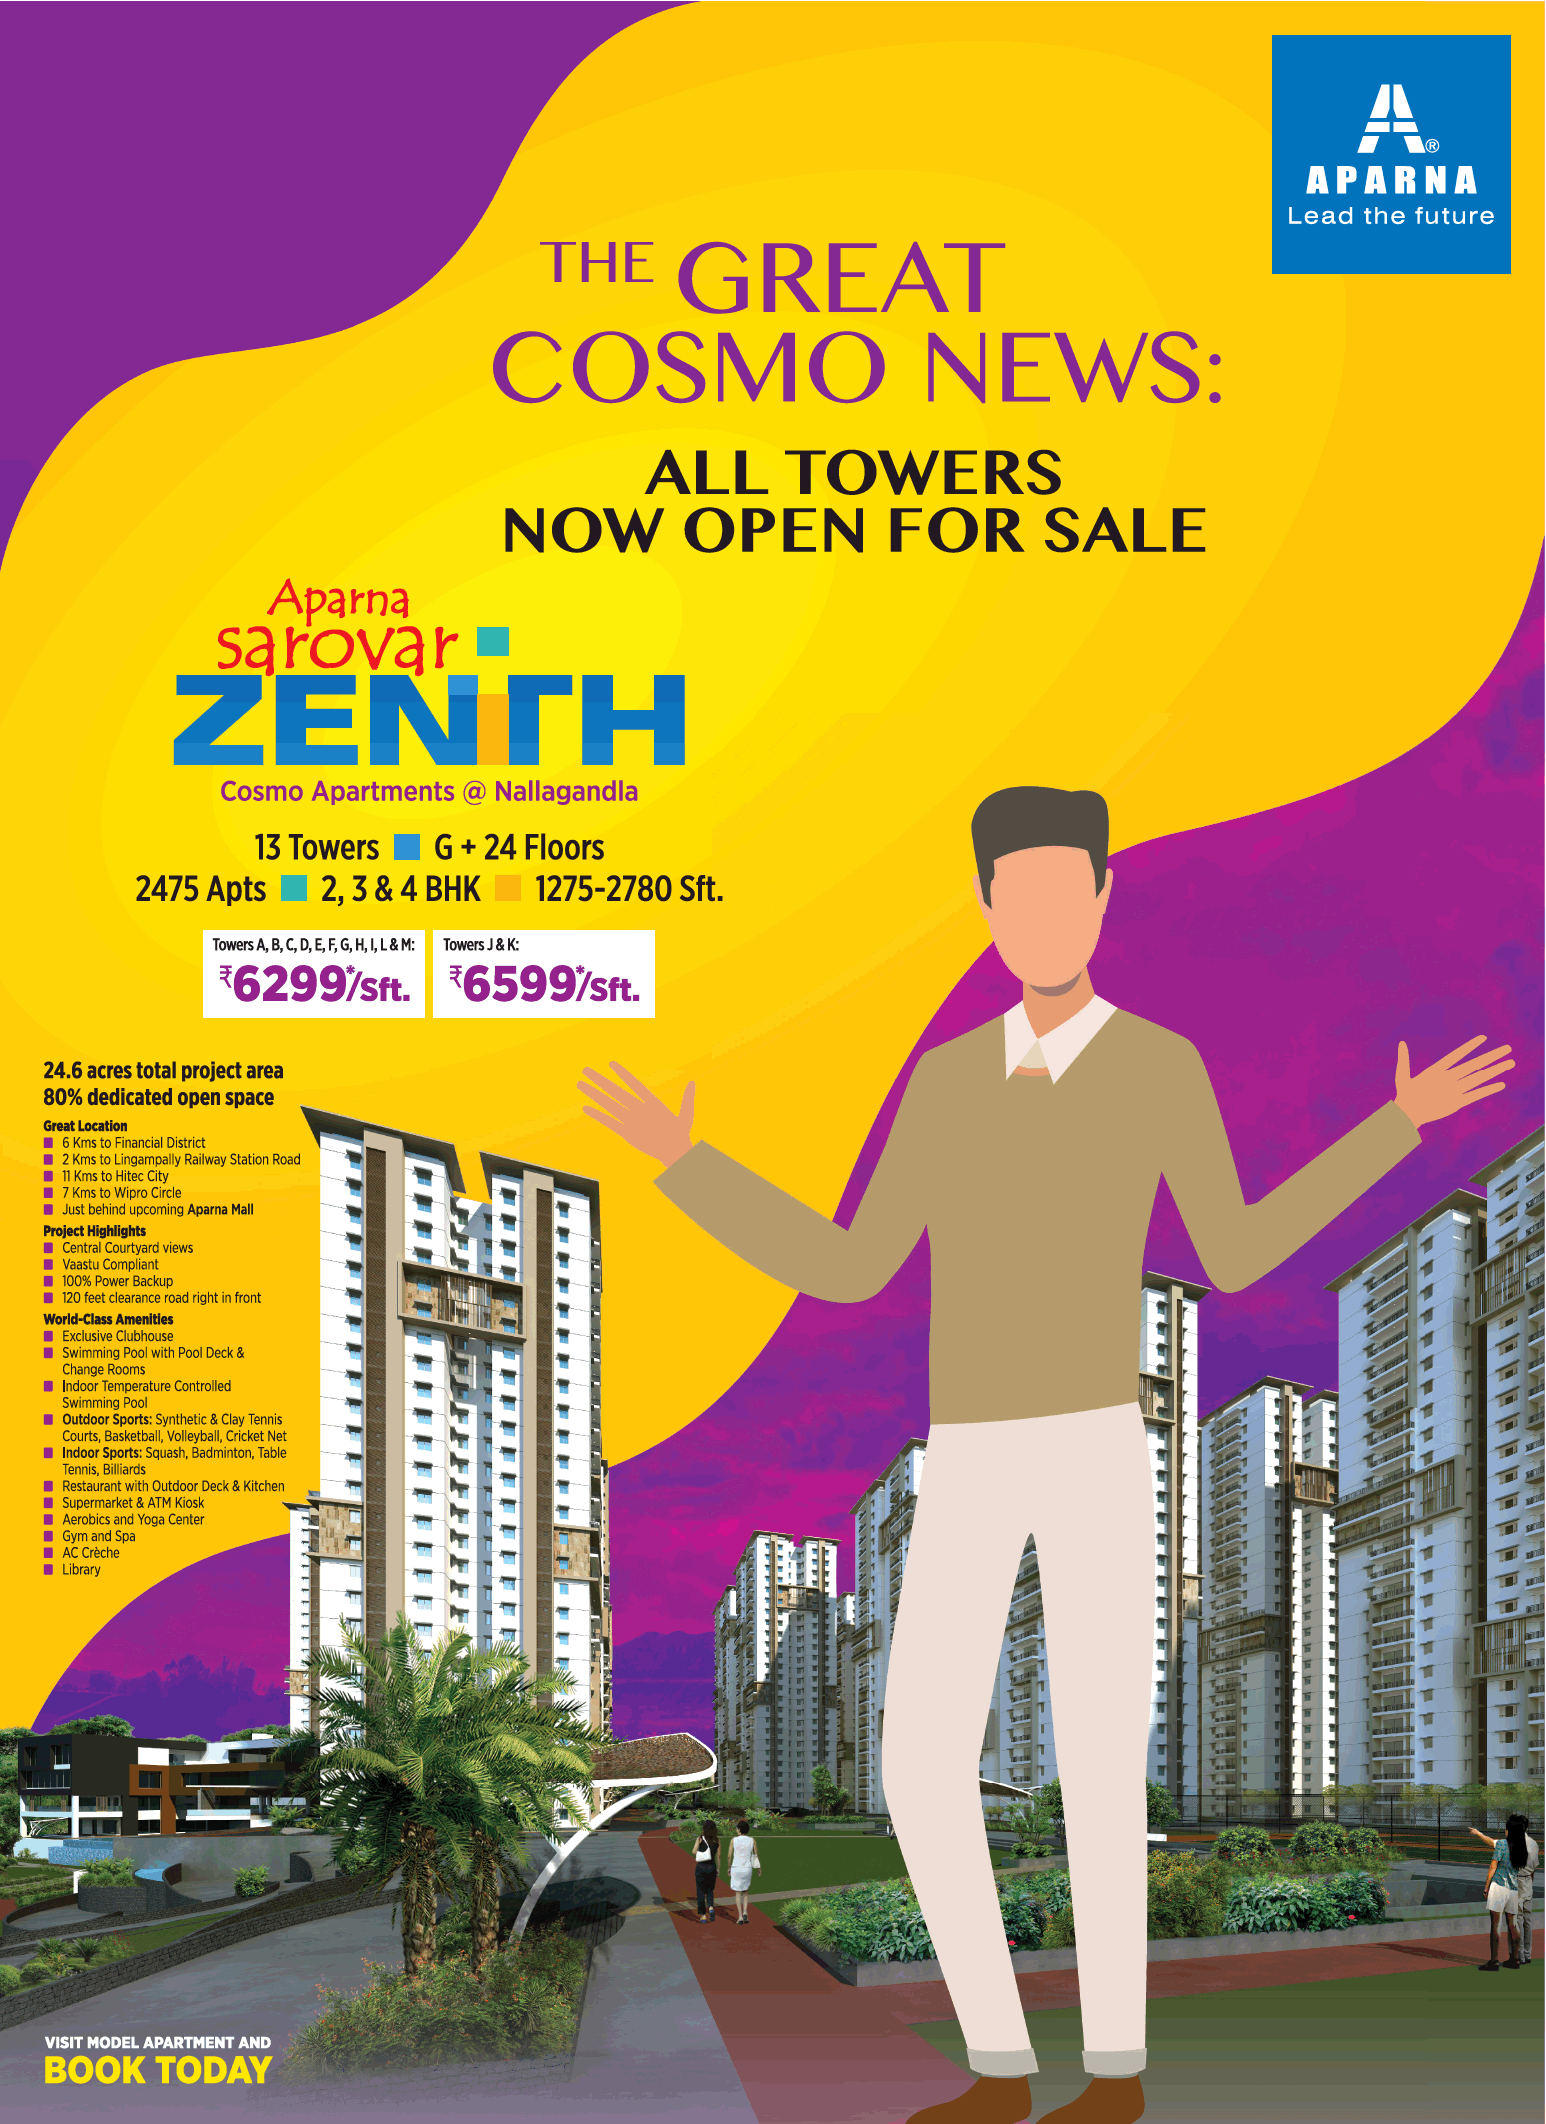 All towers now open for sale at Aparna Sarovar Zenith in Hyderabad Update